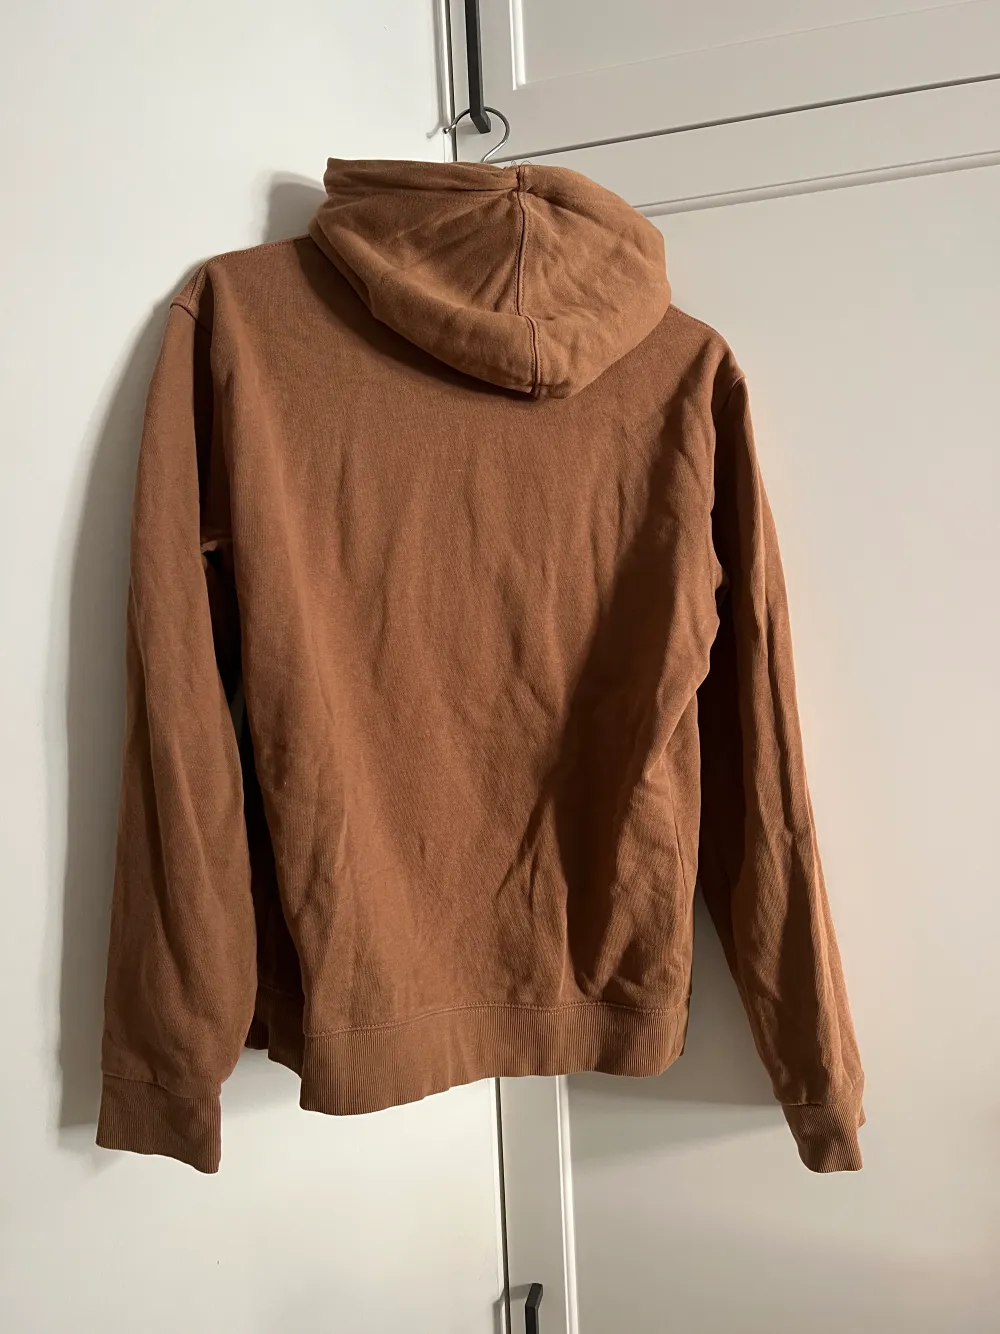 Light brown hoodie. Front pocket seam is broken (but easy to fix). Soft and thinner material. Classic fit, not oversize.. Hoodies.